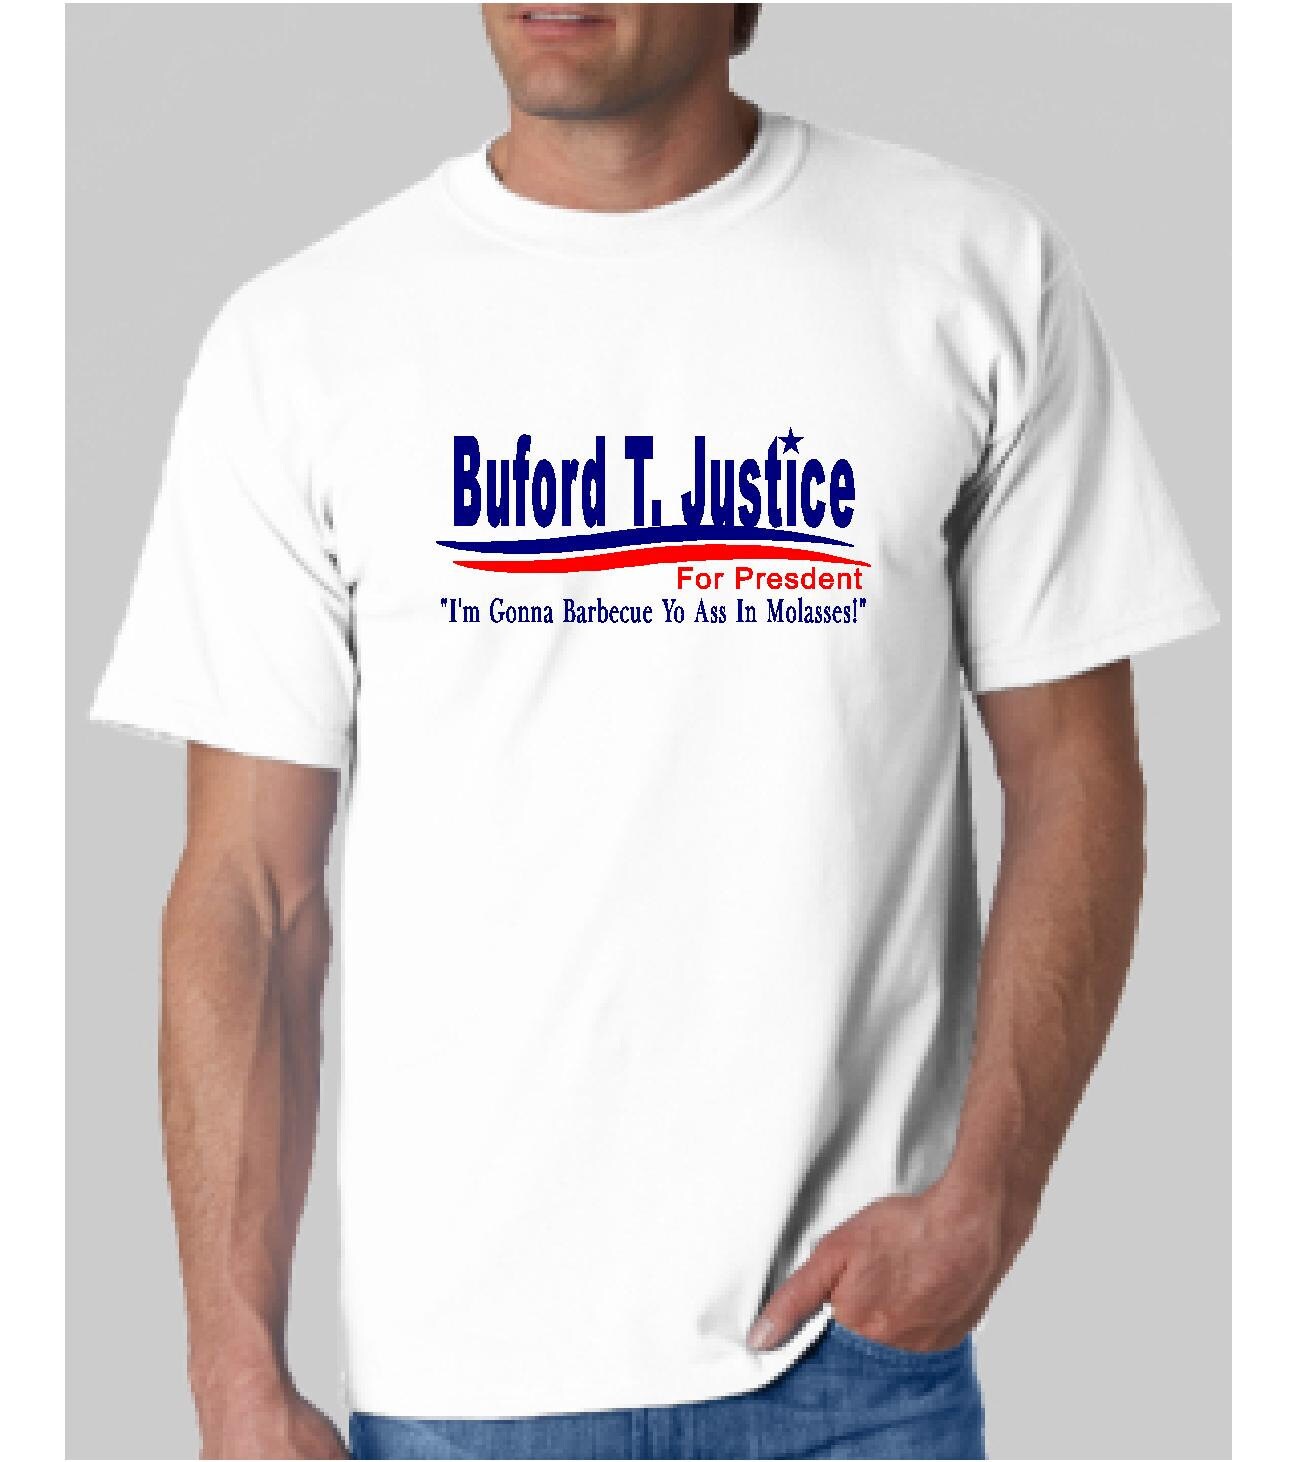 Buford T Justice For President men's T-shirt